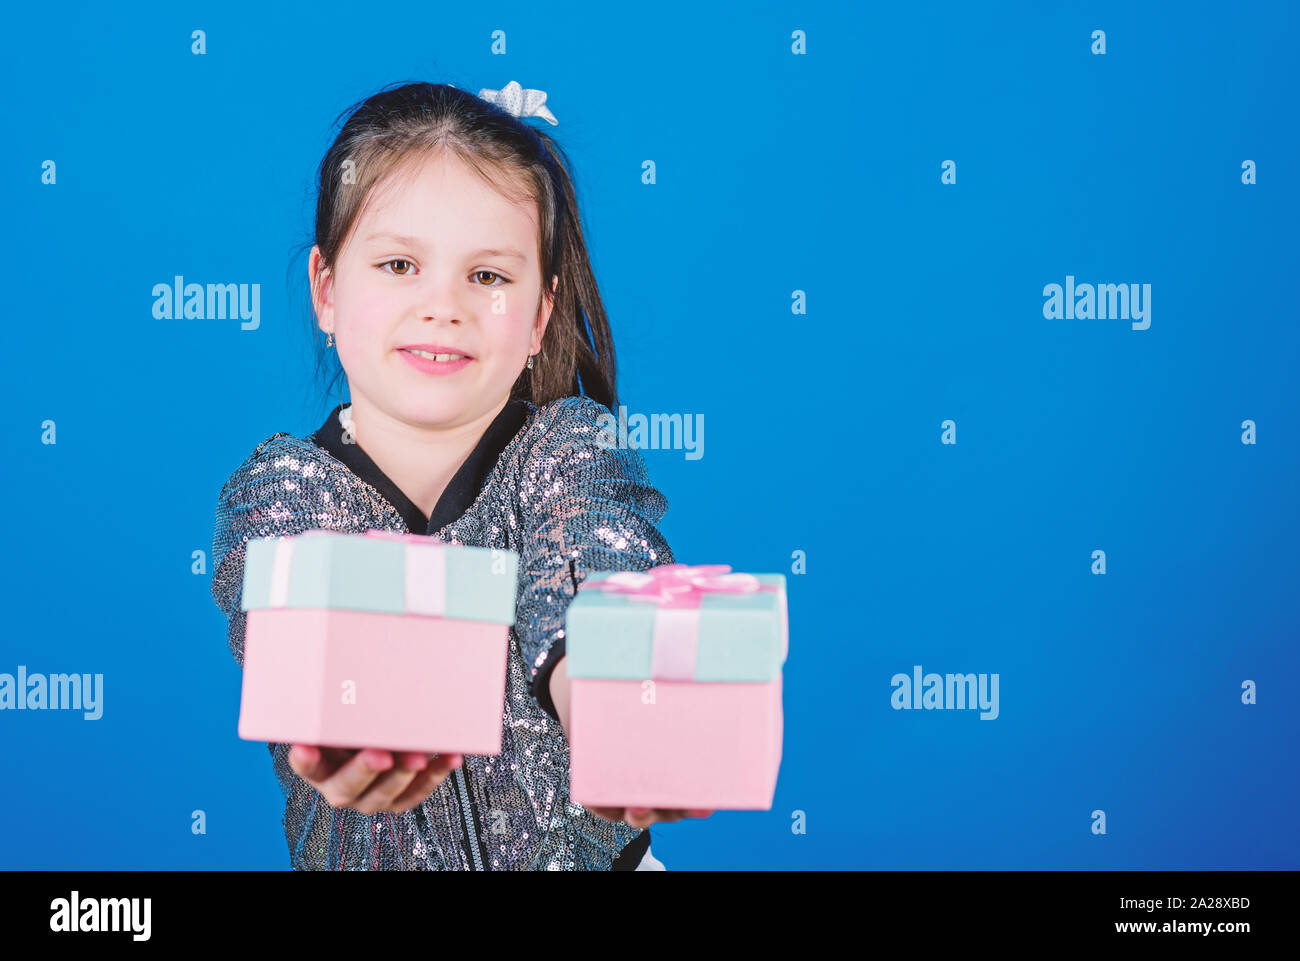 Girl with gift boxes blue background. Black friday. Shopping day. Cute child carry gift boxes. Surprise gift box. Birthday wish list. World of happiness. Special happens every day. Choose one. Stock Photo